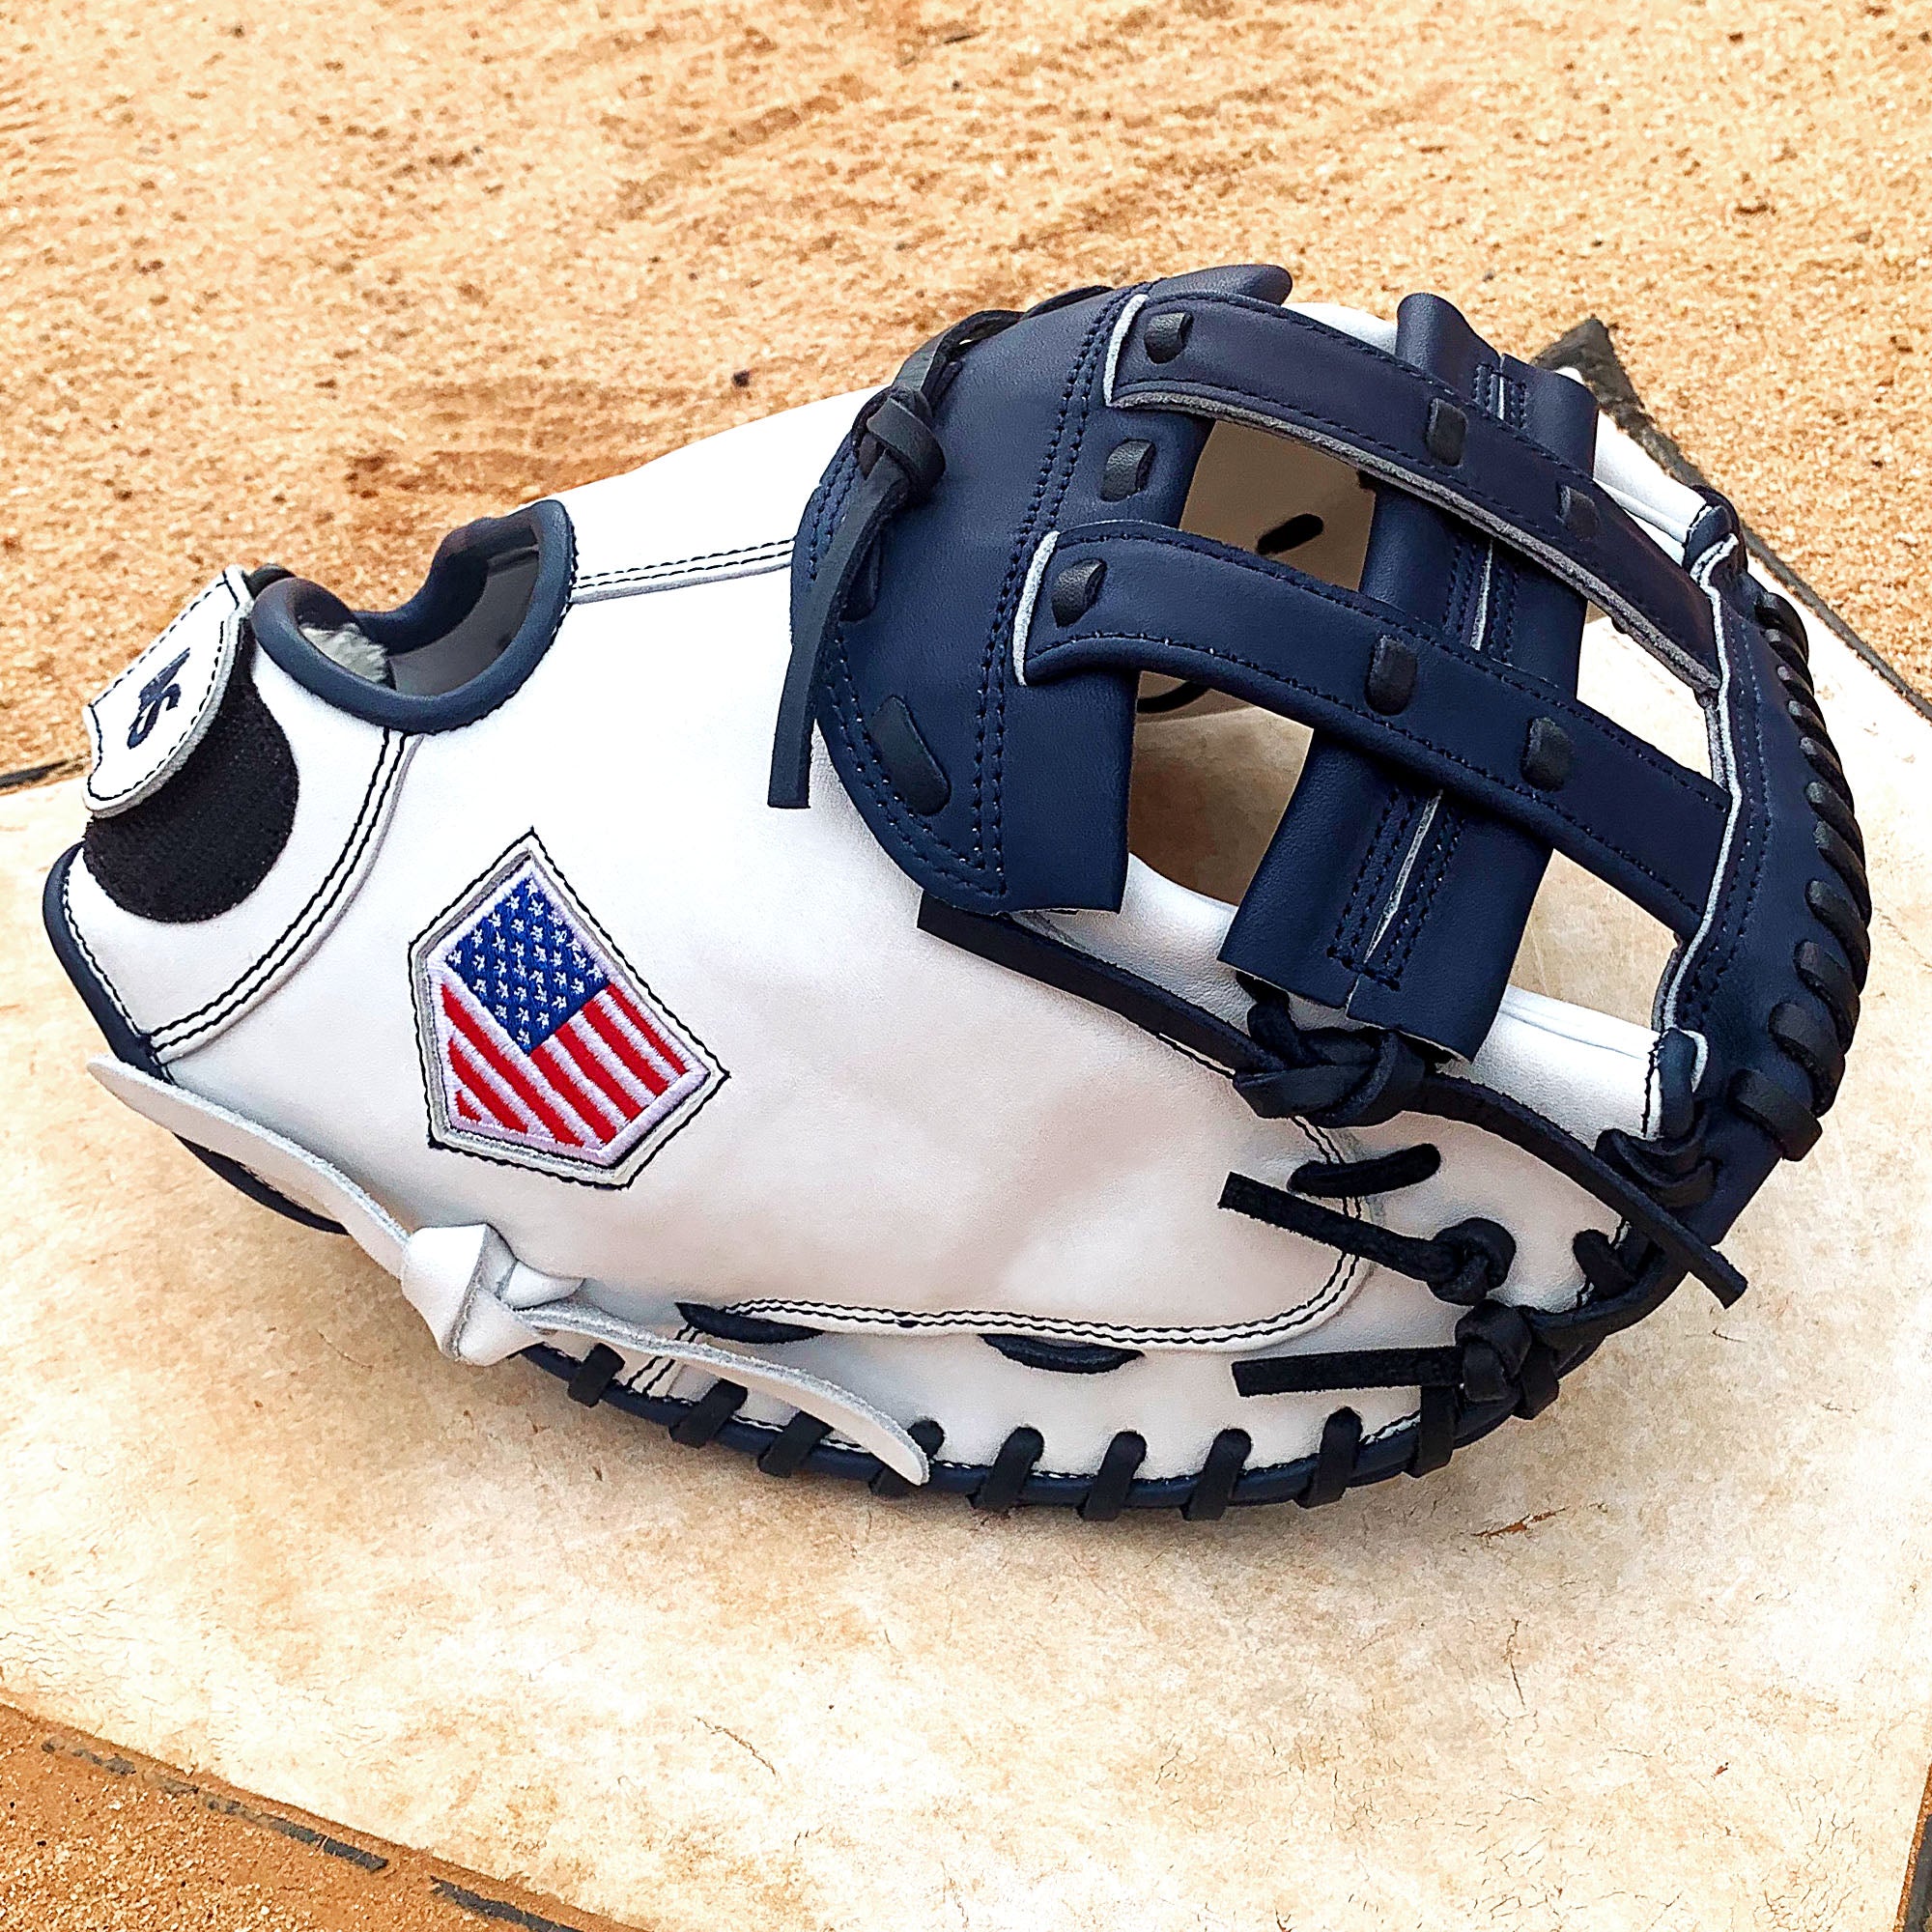 Top Quality Leather 34 inch Softball Catcher's Mitt: Hit Run Steal